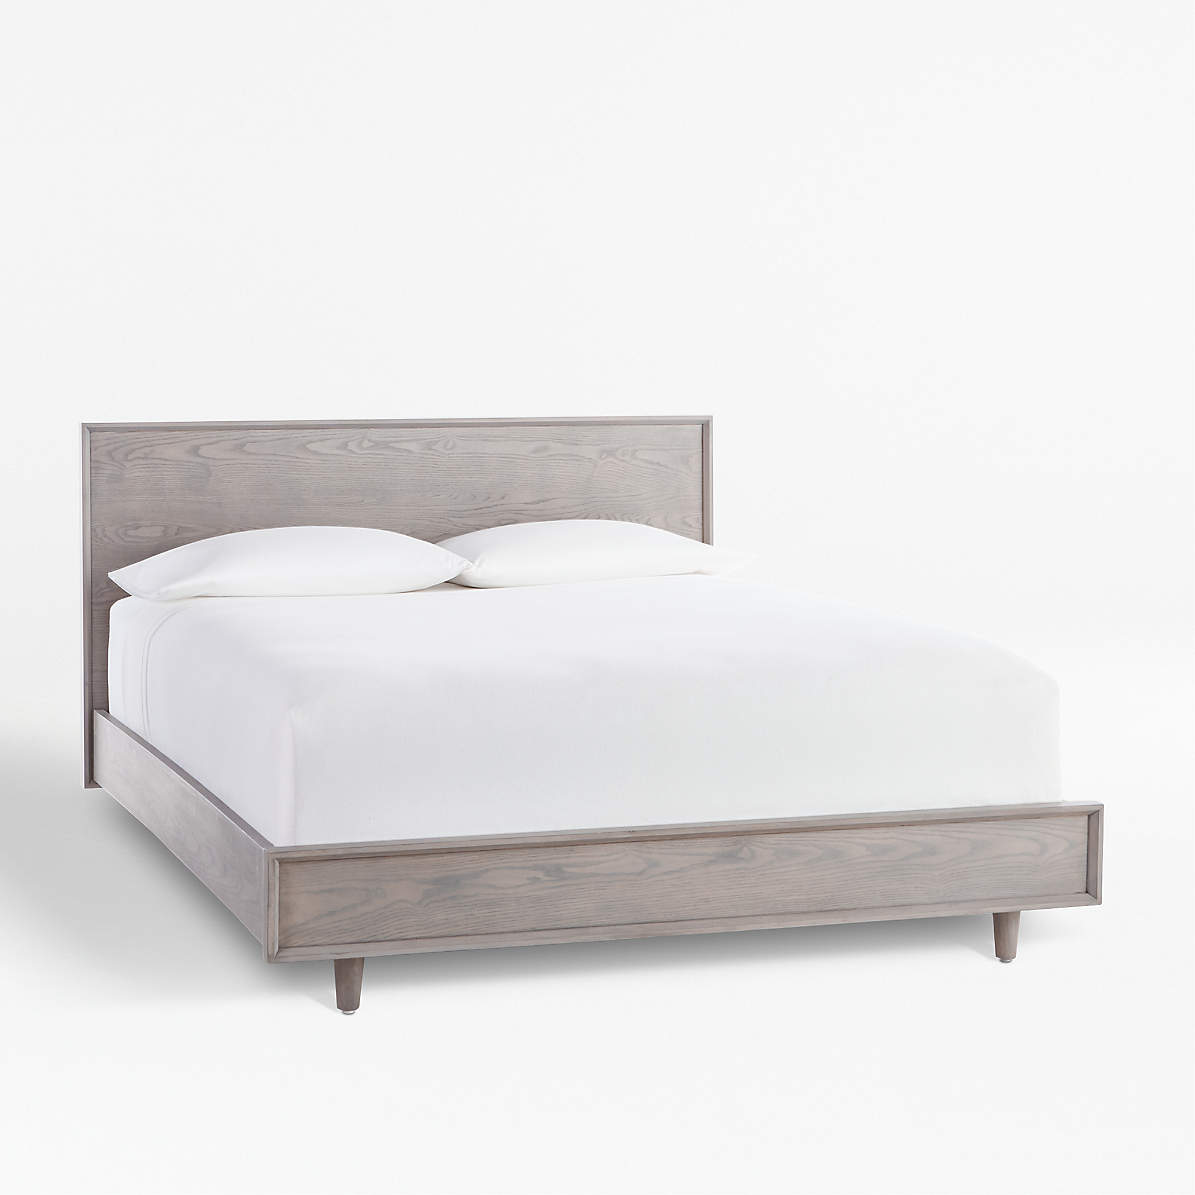 Tate Stone Bed Crate And Barrel, Stone Bed Frame